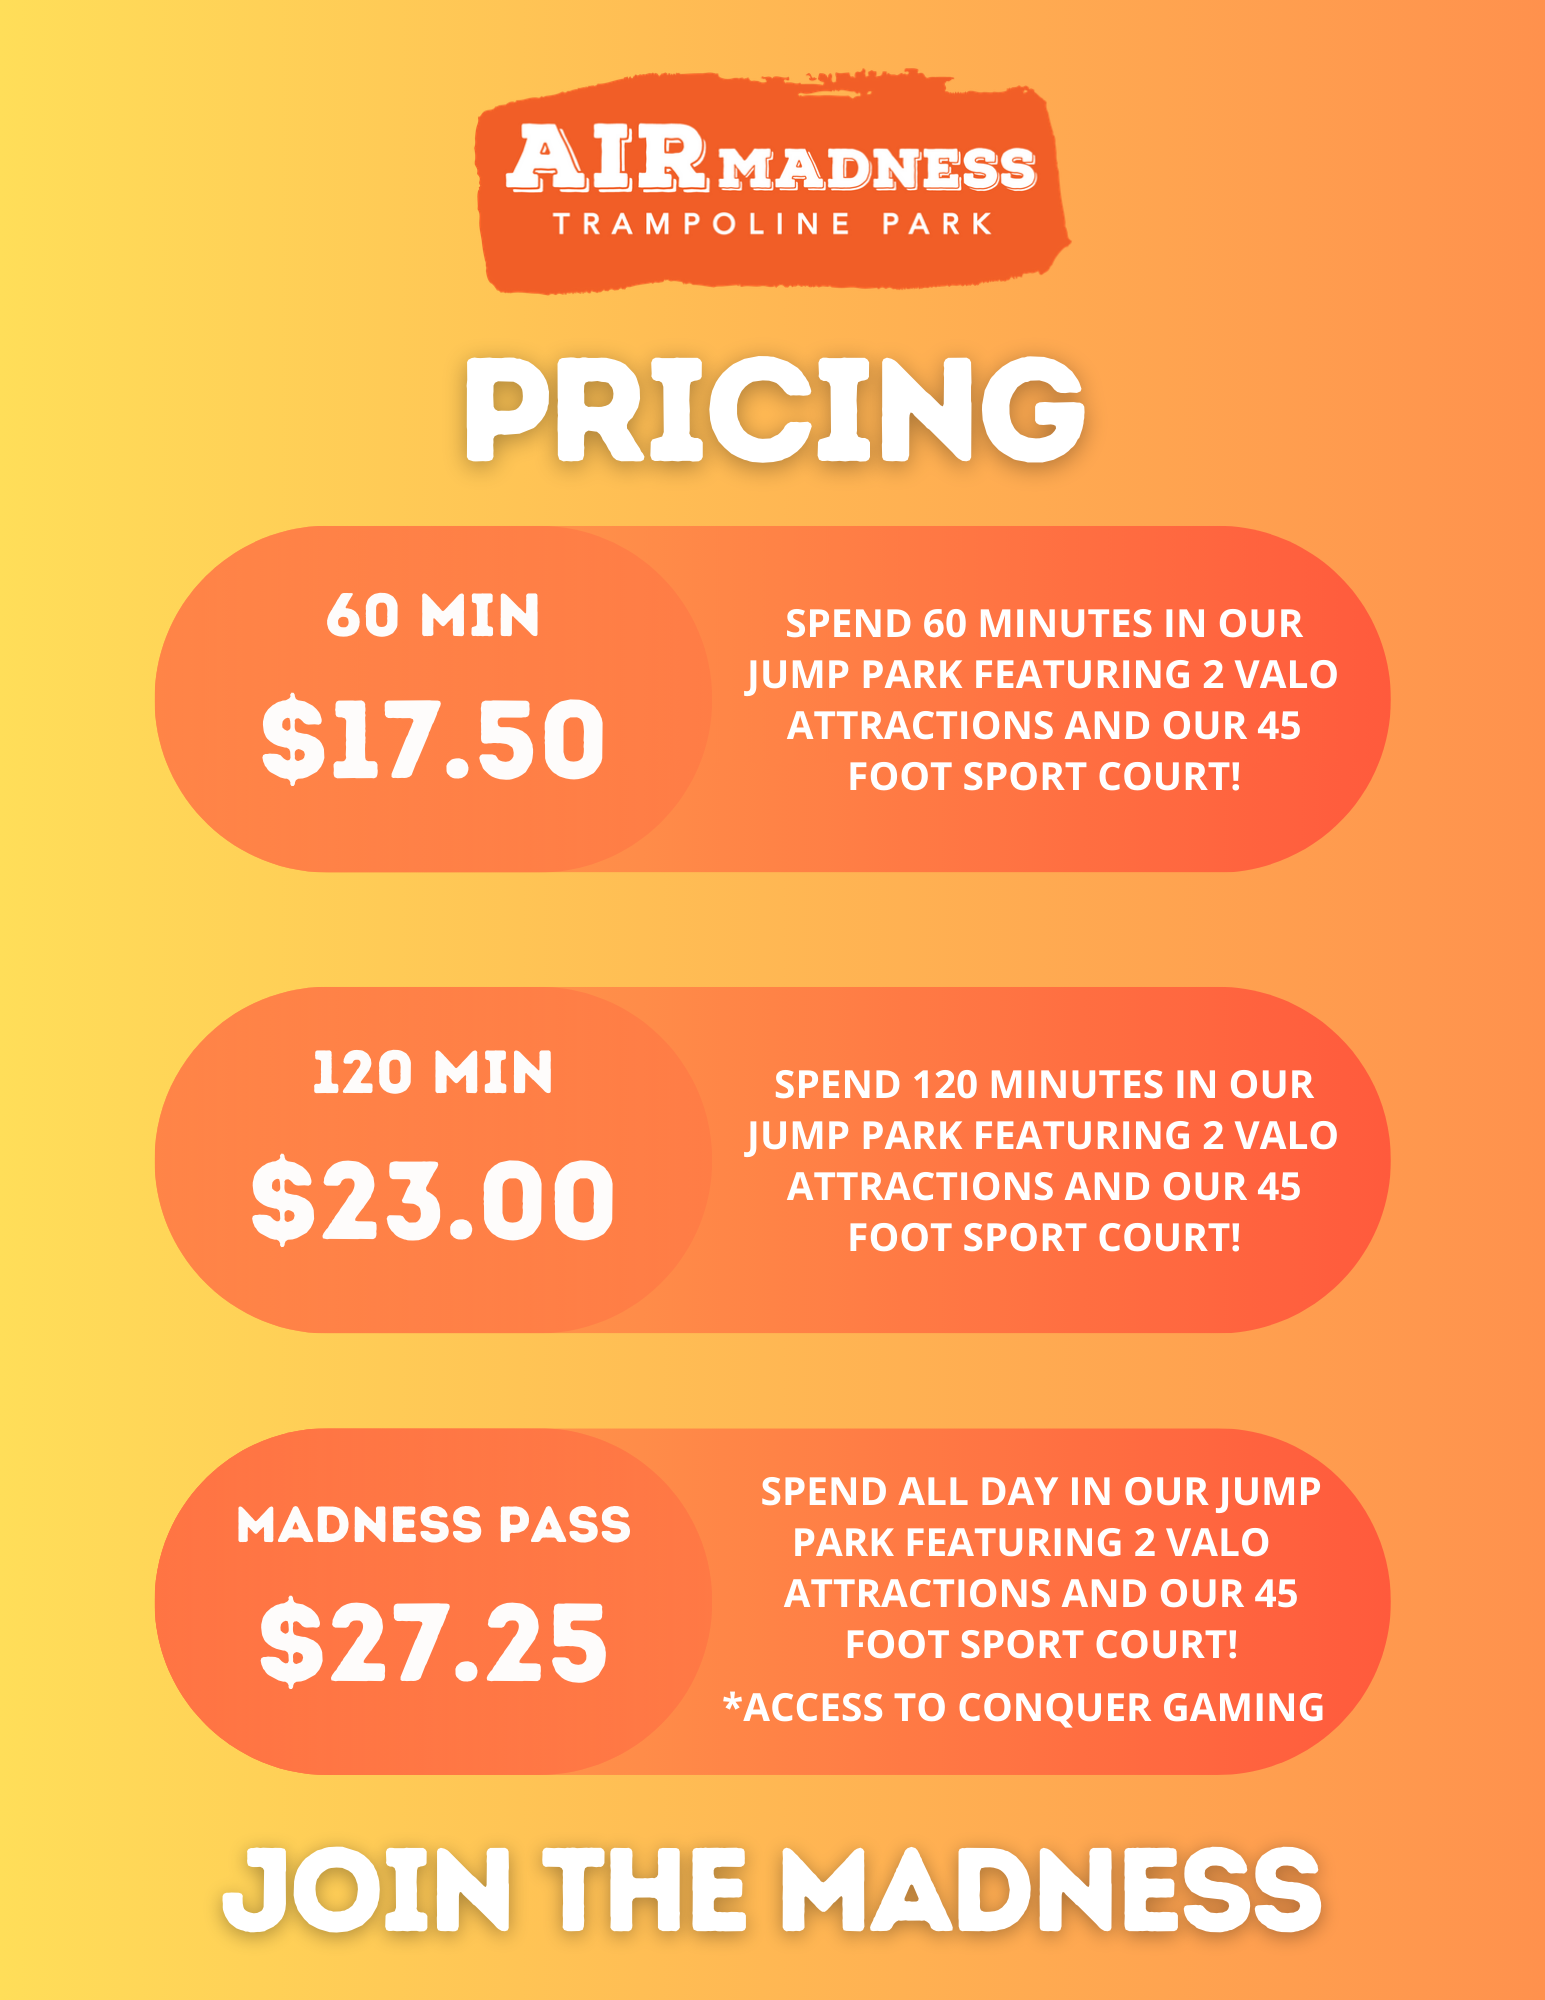 AIR MADNESS PRICING